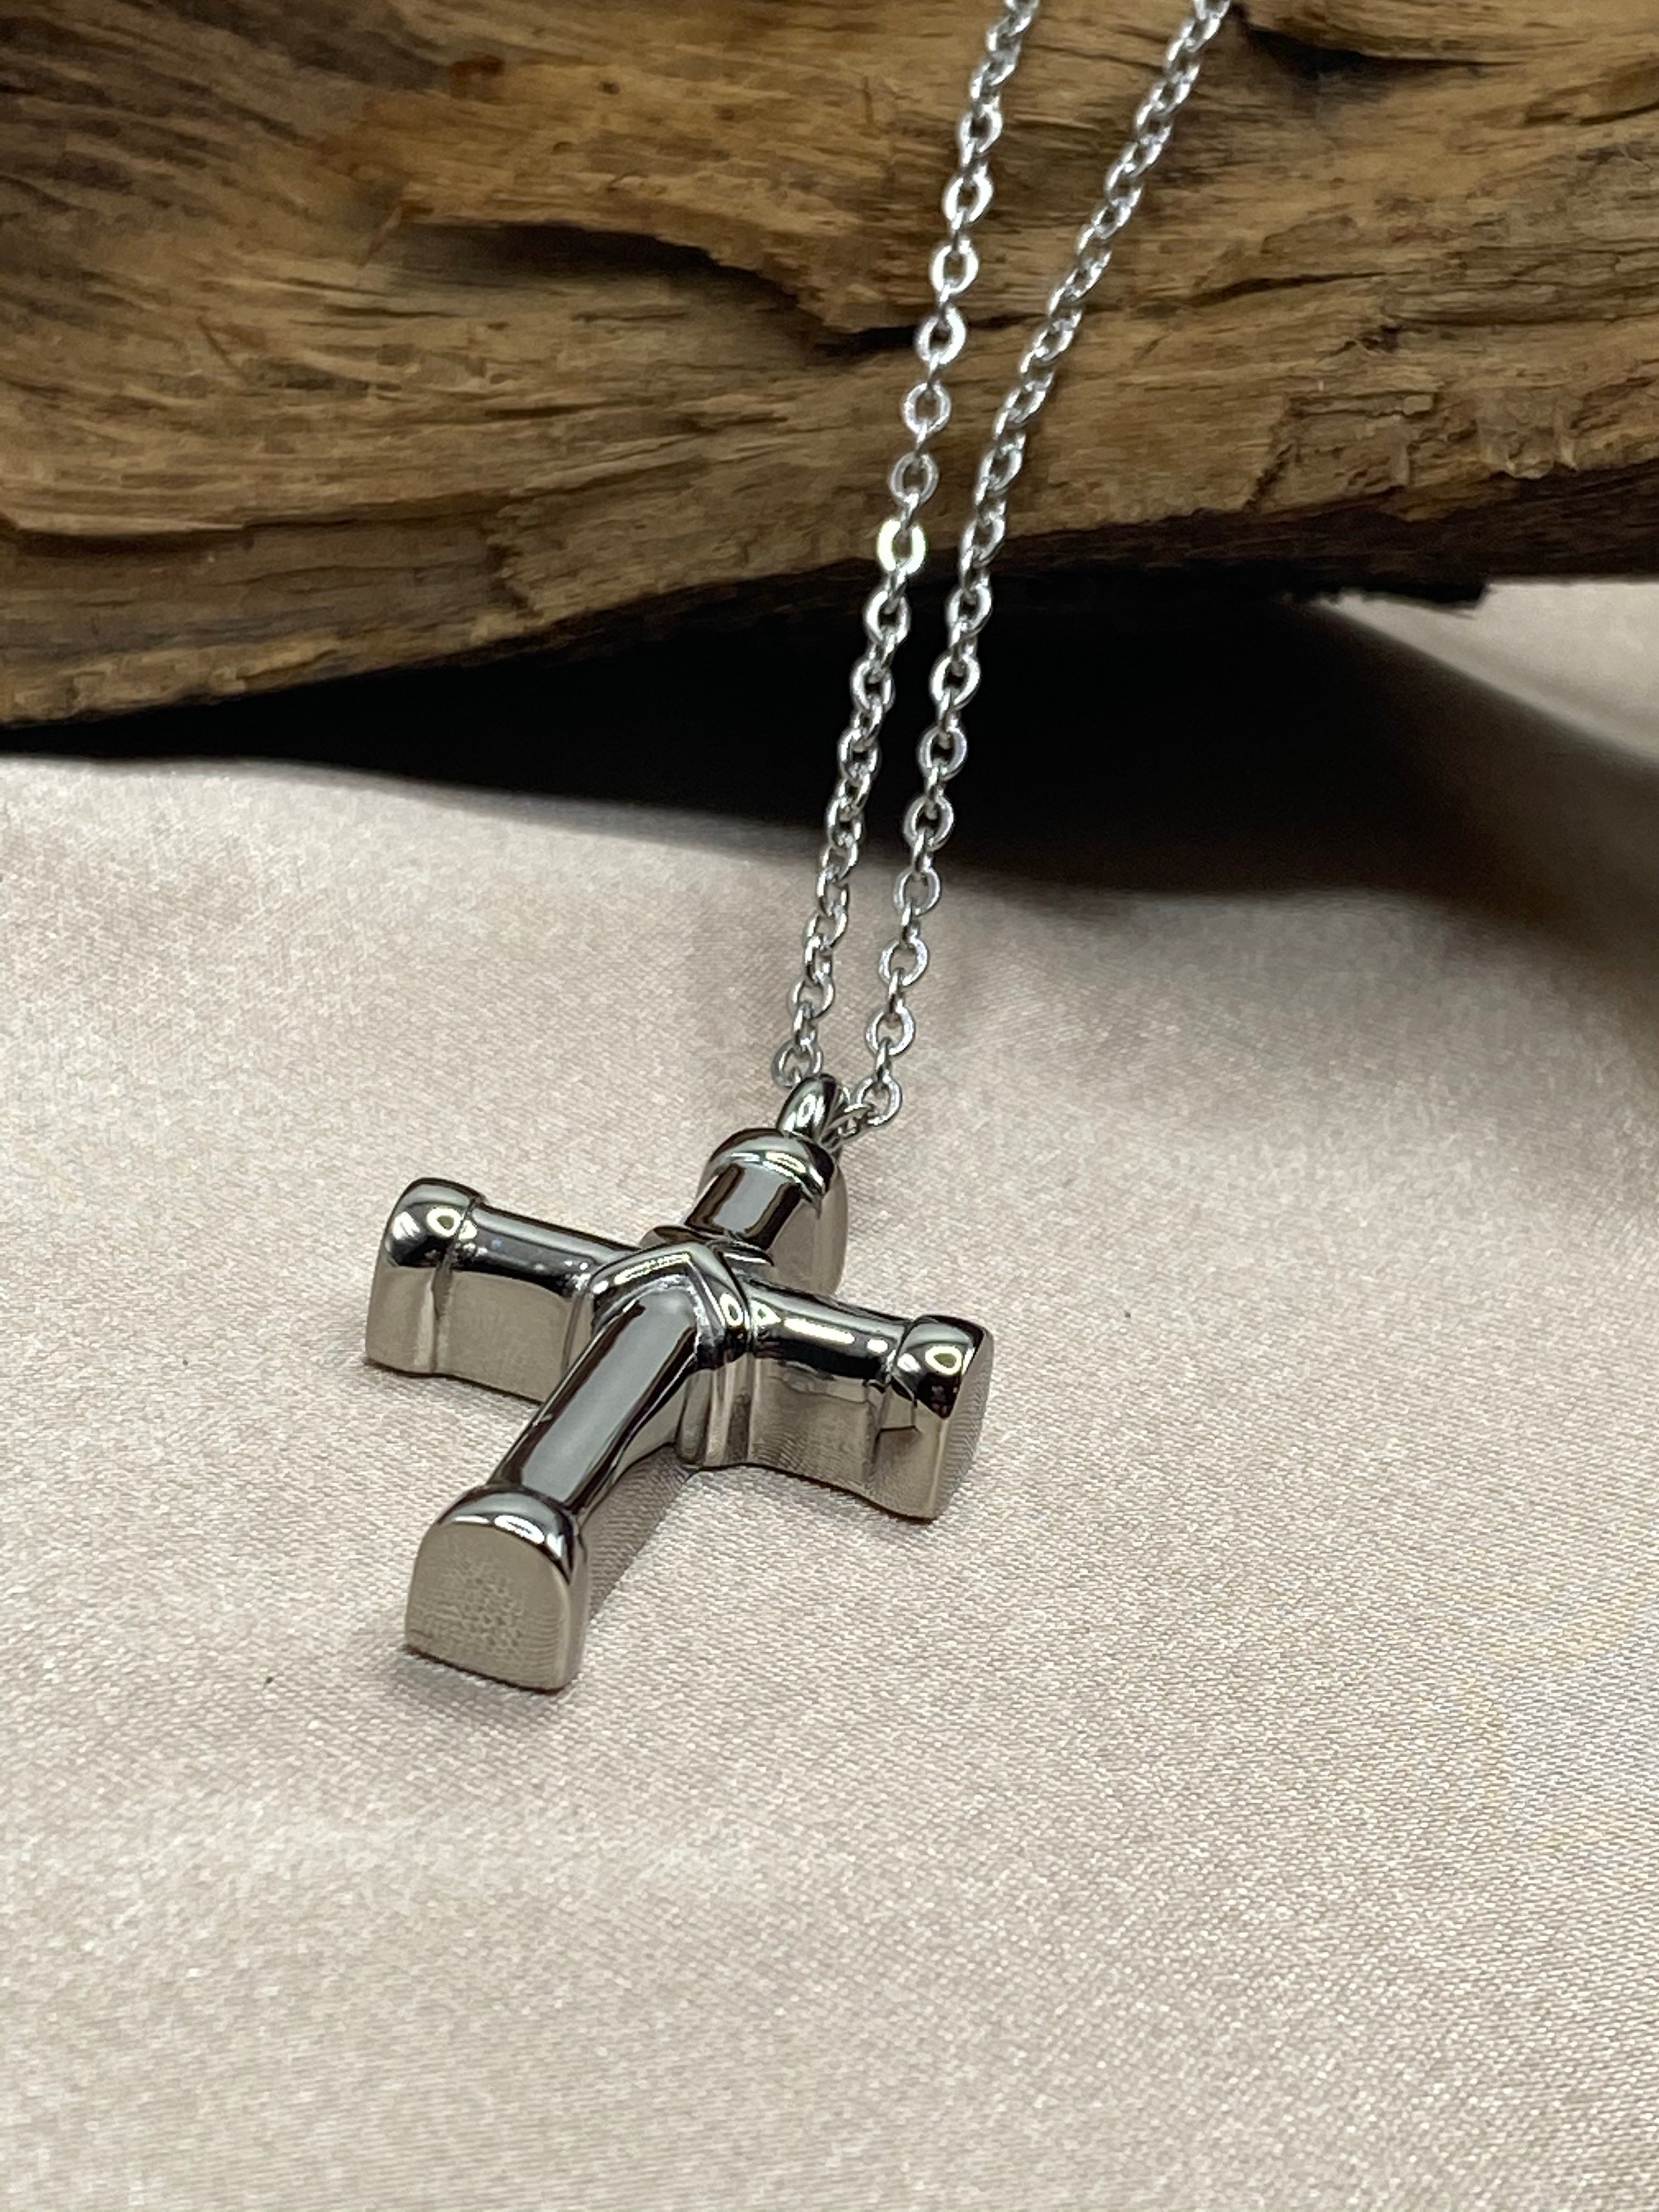 High Quality Metal Funeral Cremation Cross Pendant Urn Necklace for Ashes  BIBI | eBay